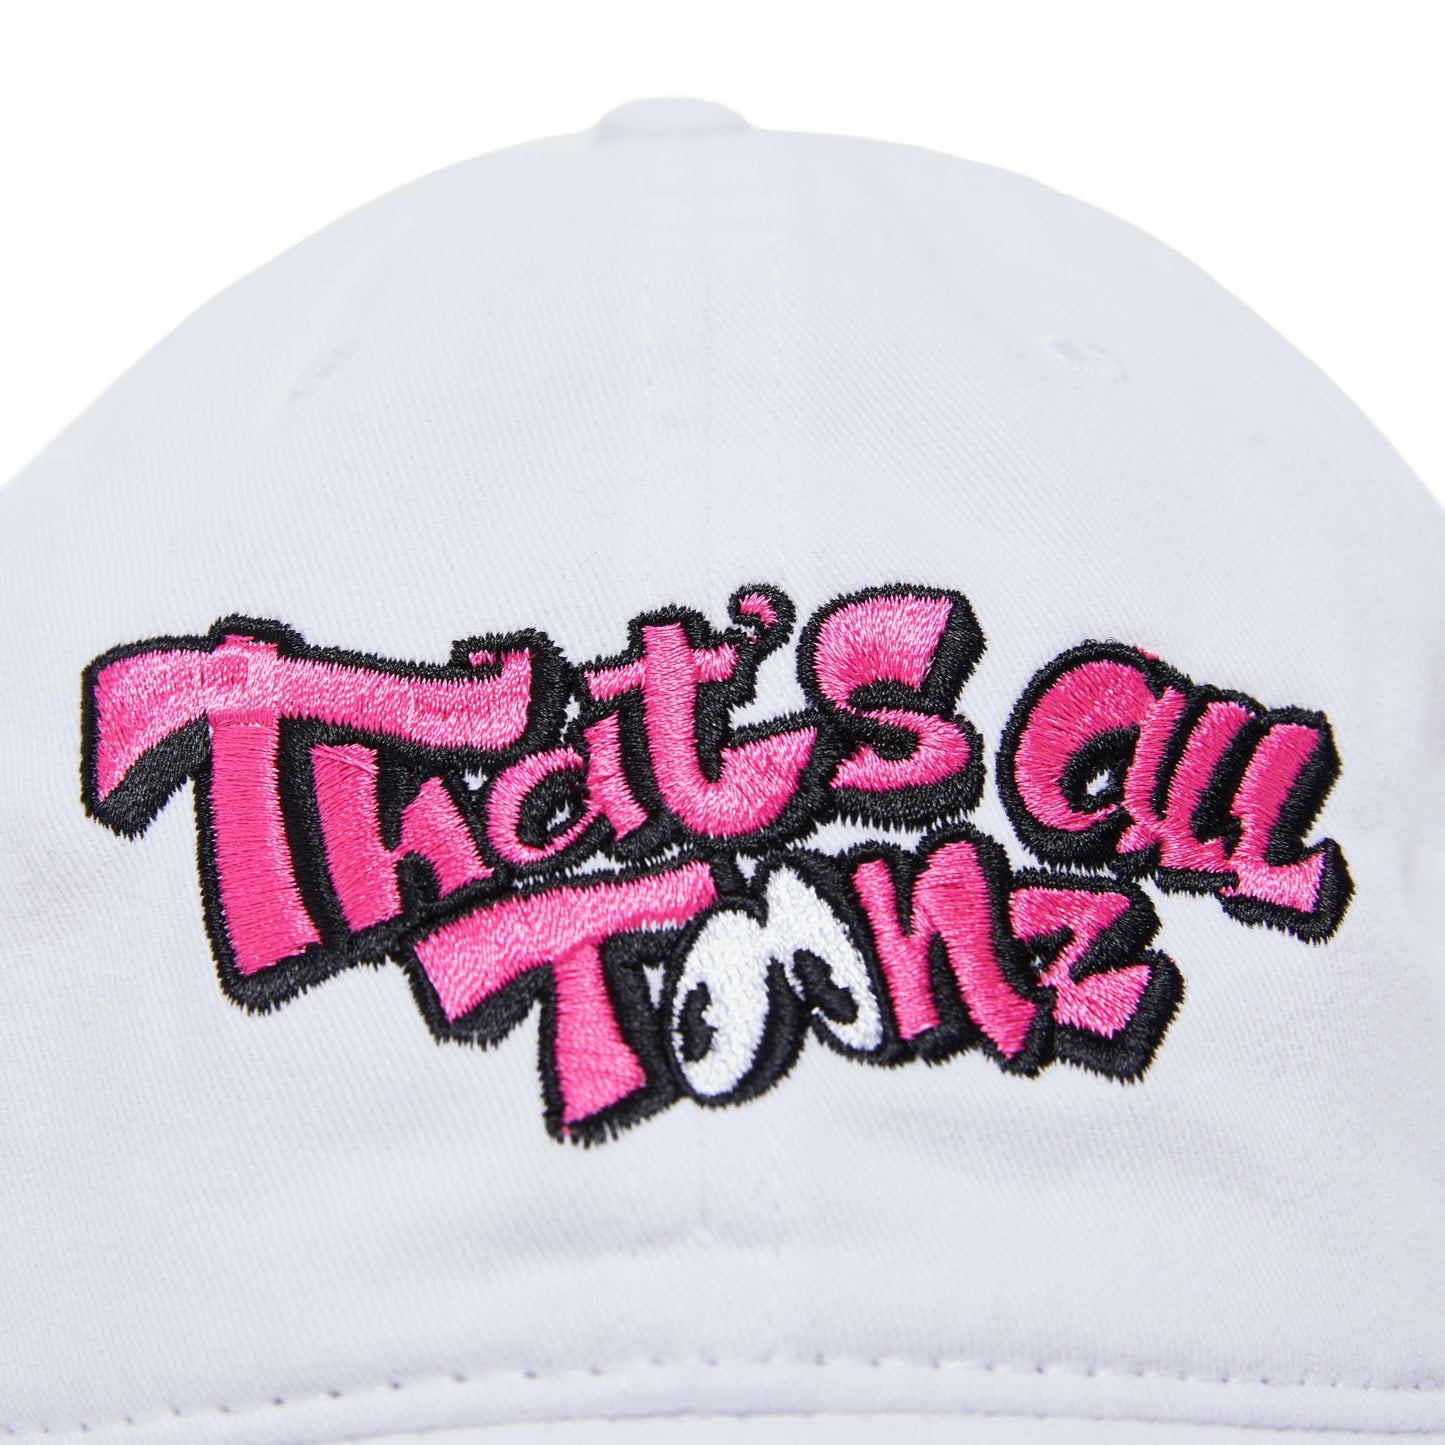 That's All Toonz Embroidered Hat